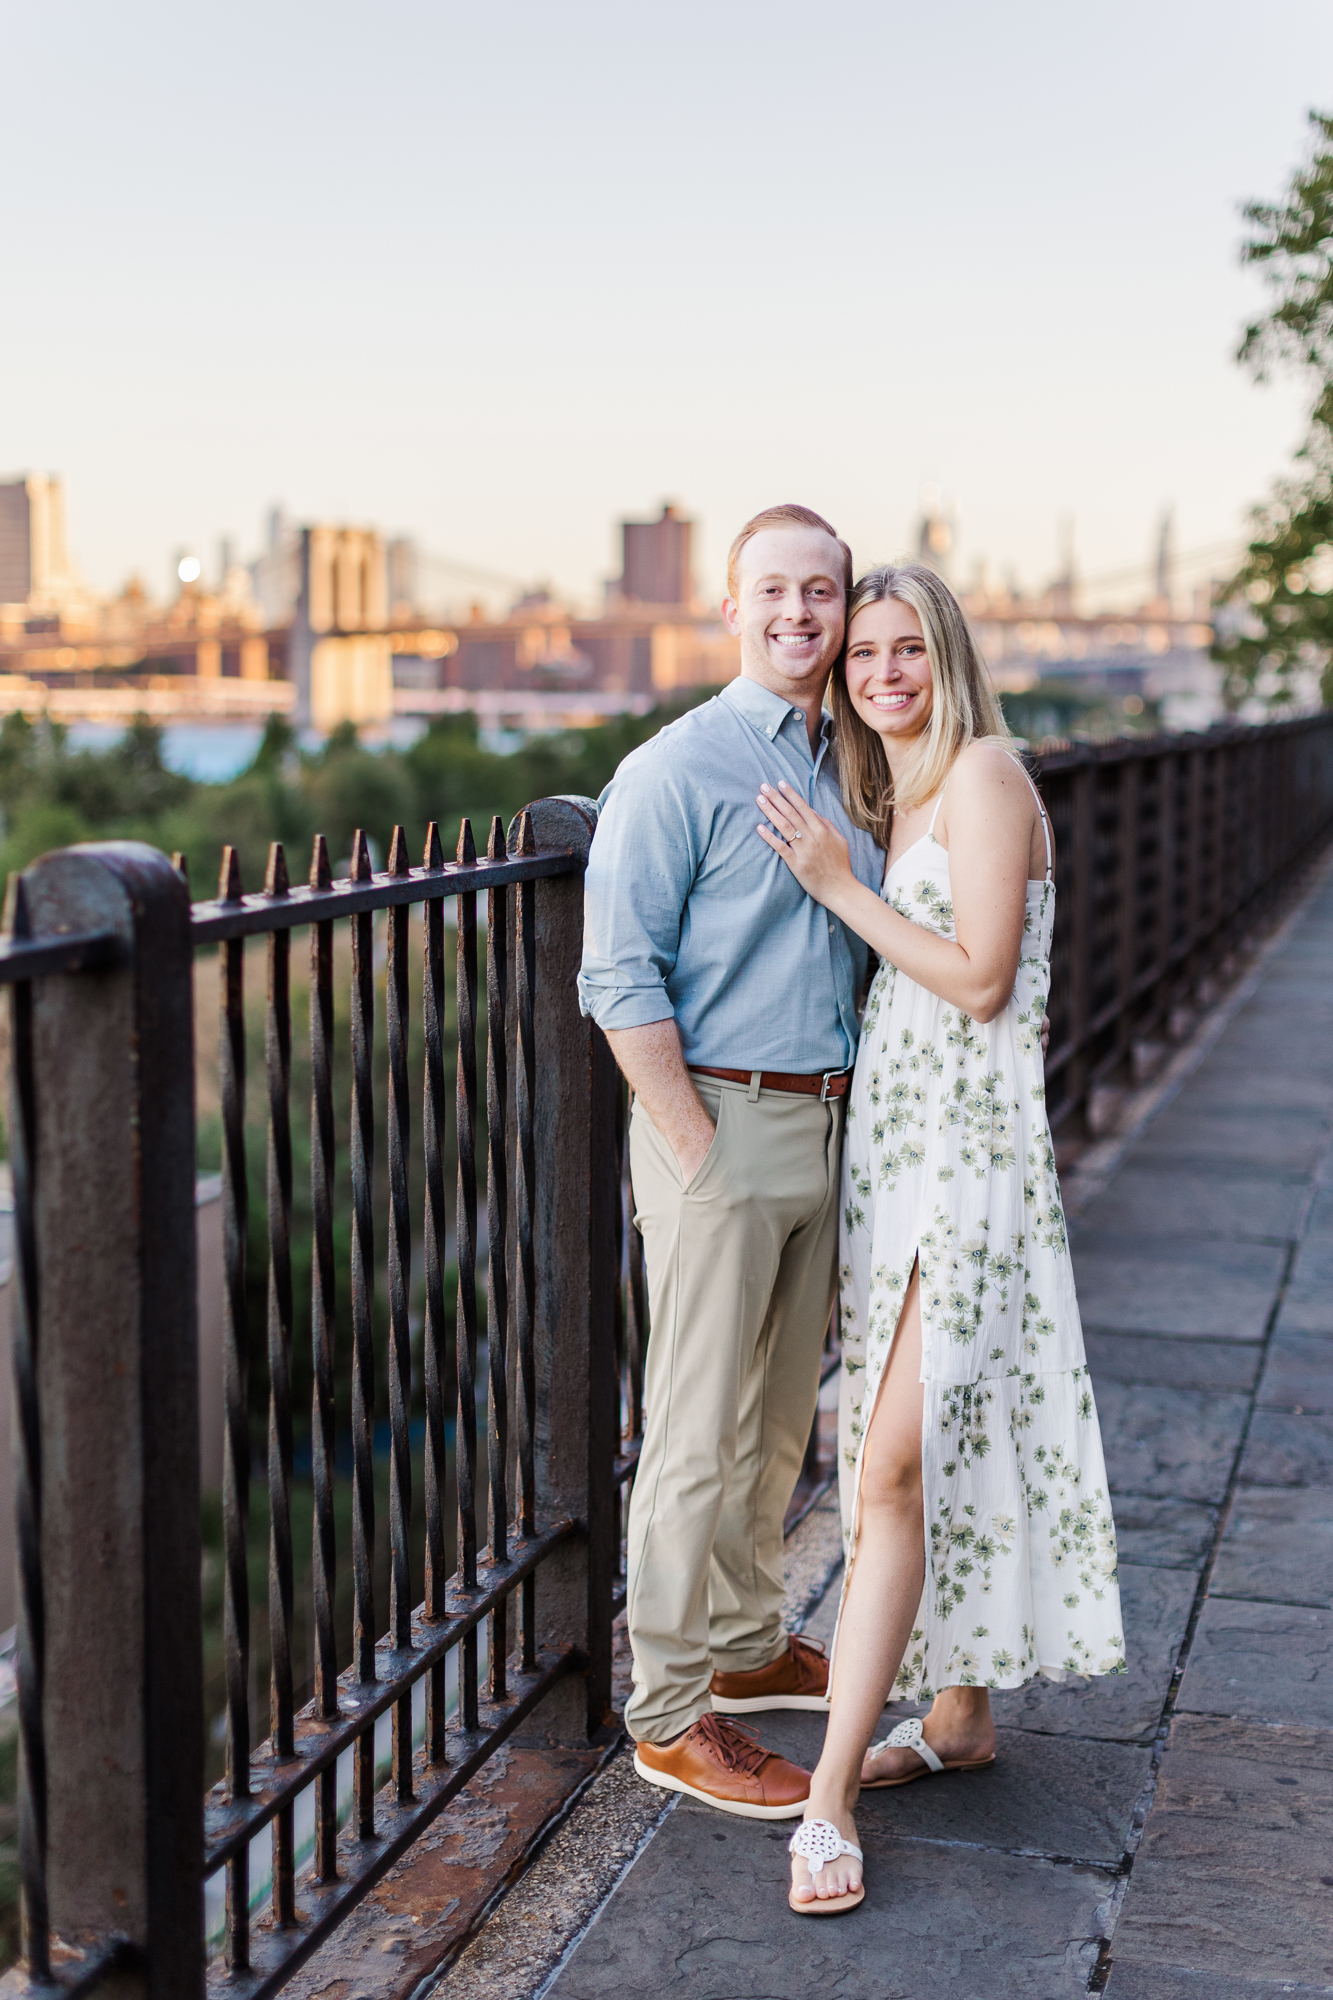 Personal Engagement Photos In Brooklyn Heights